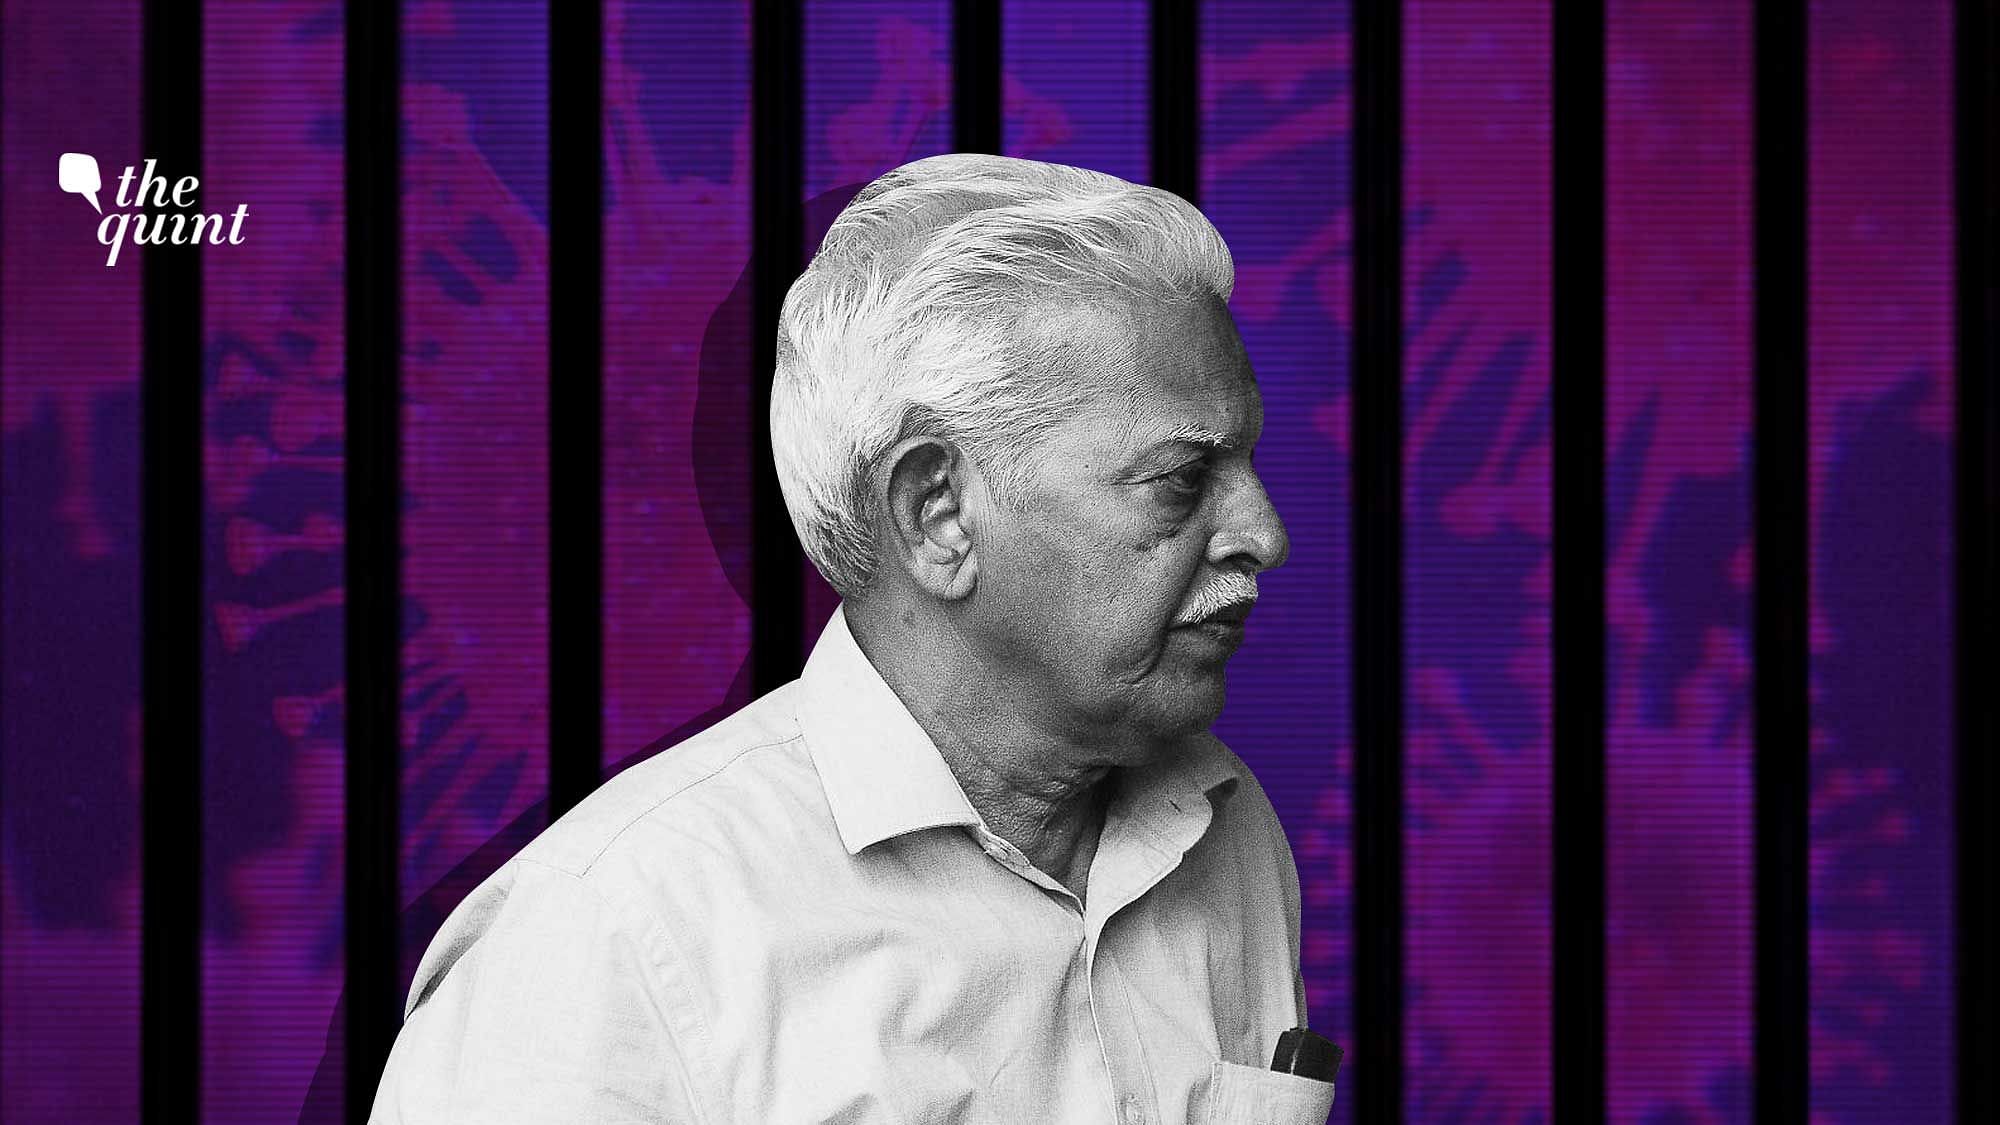 Varavara Rao, 80, is a co-accused in the Bhima Koregaon case. He was admitted to Nanavati Hospital after testing positive for COVID-19 in July.